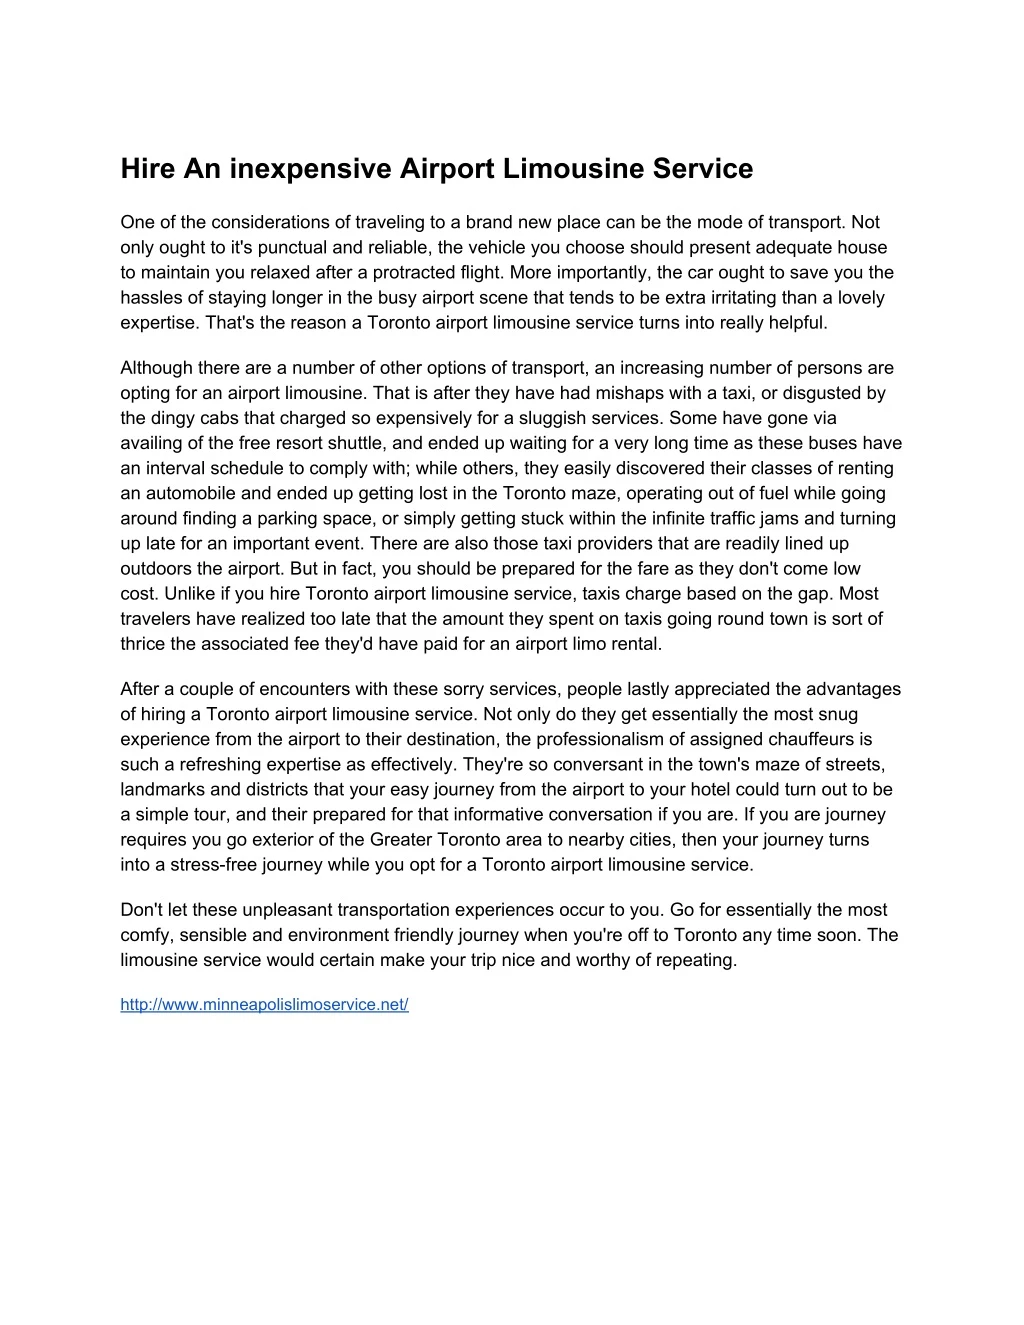 hire an inexpensive airport limousine service